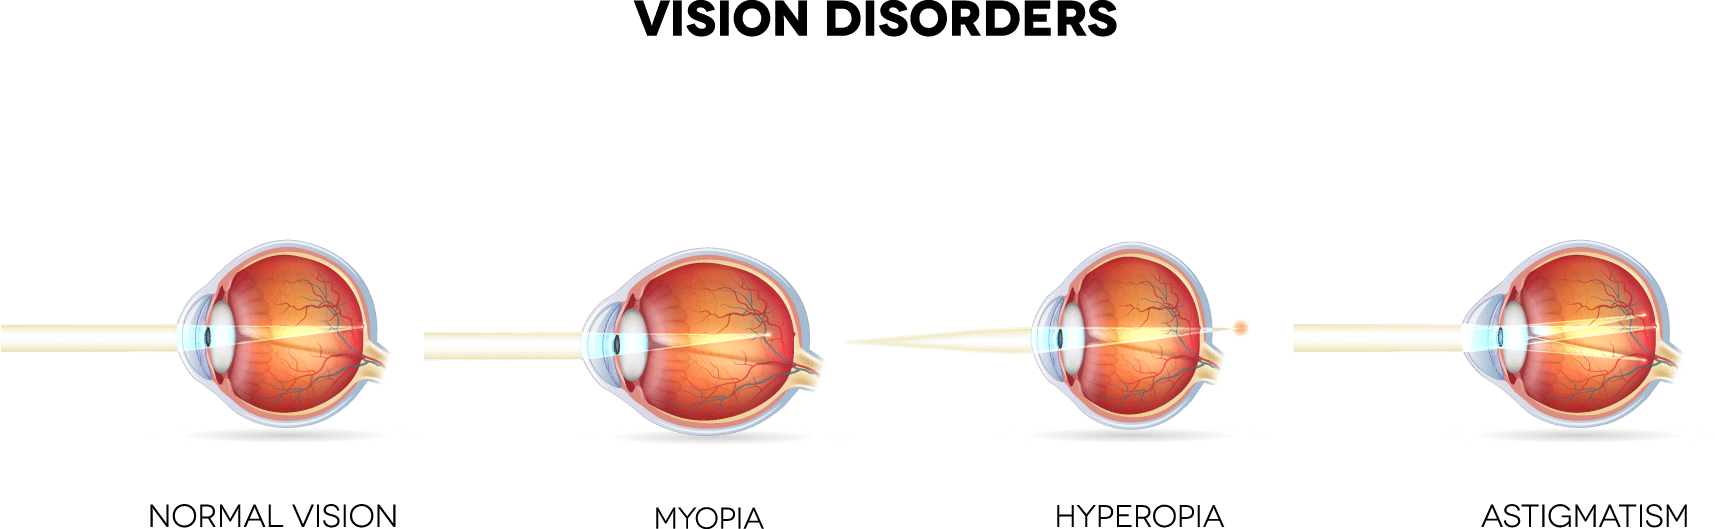 Common vision disorders treated by LASIK